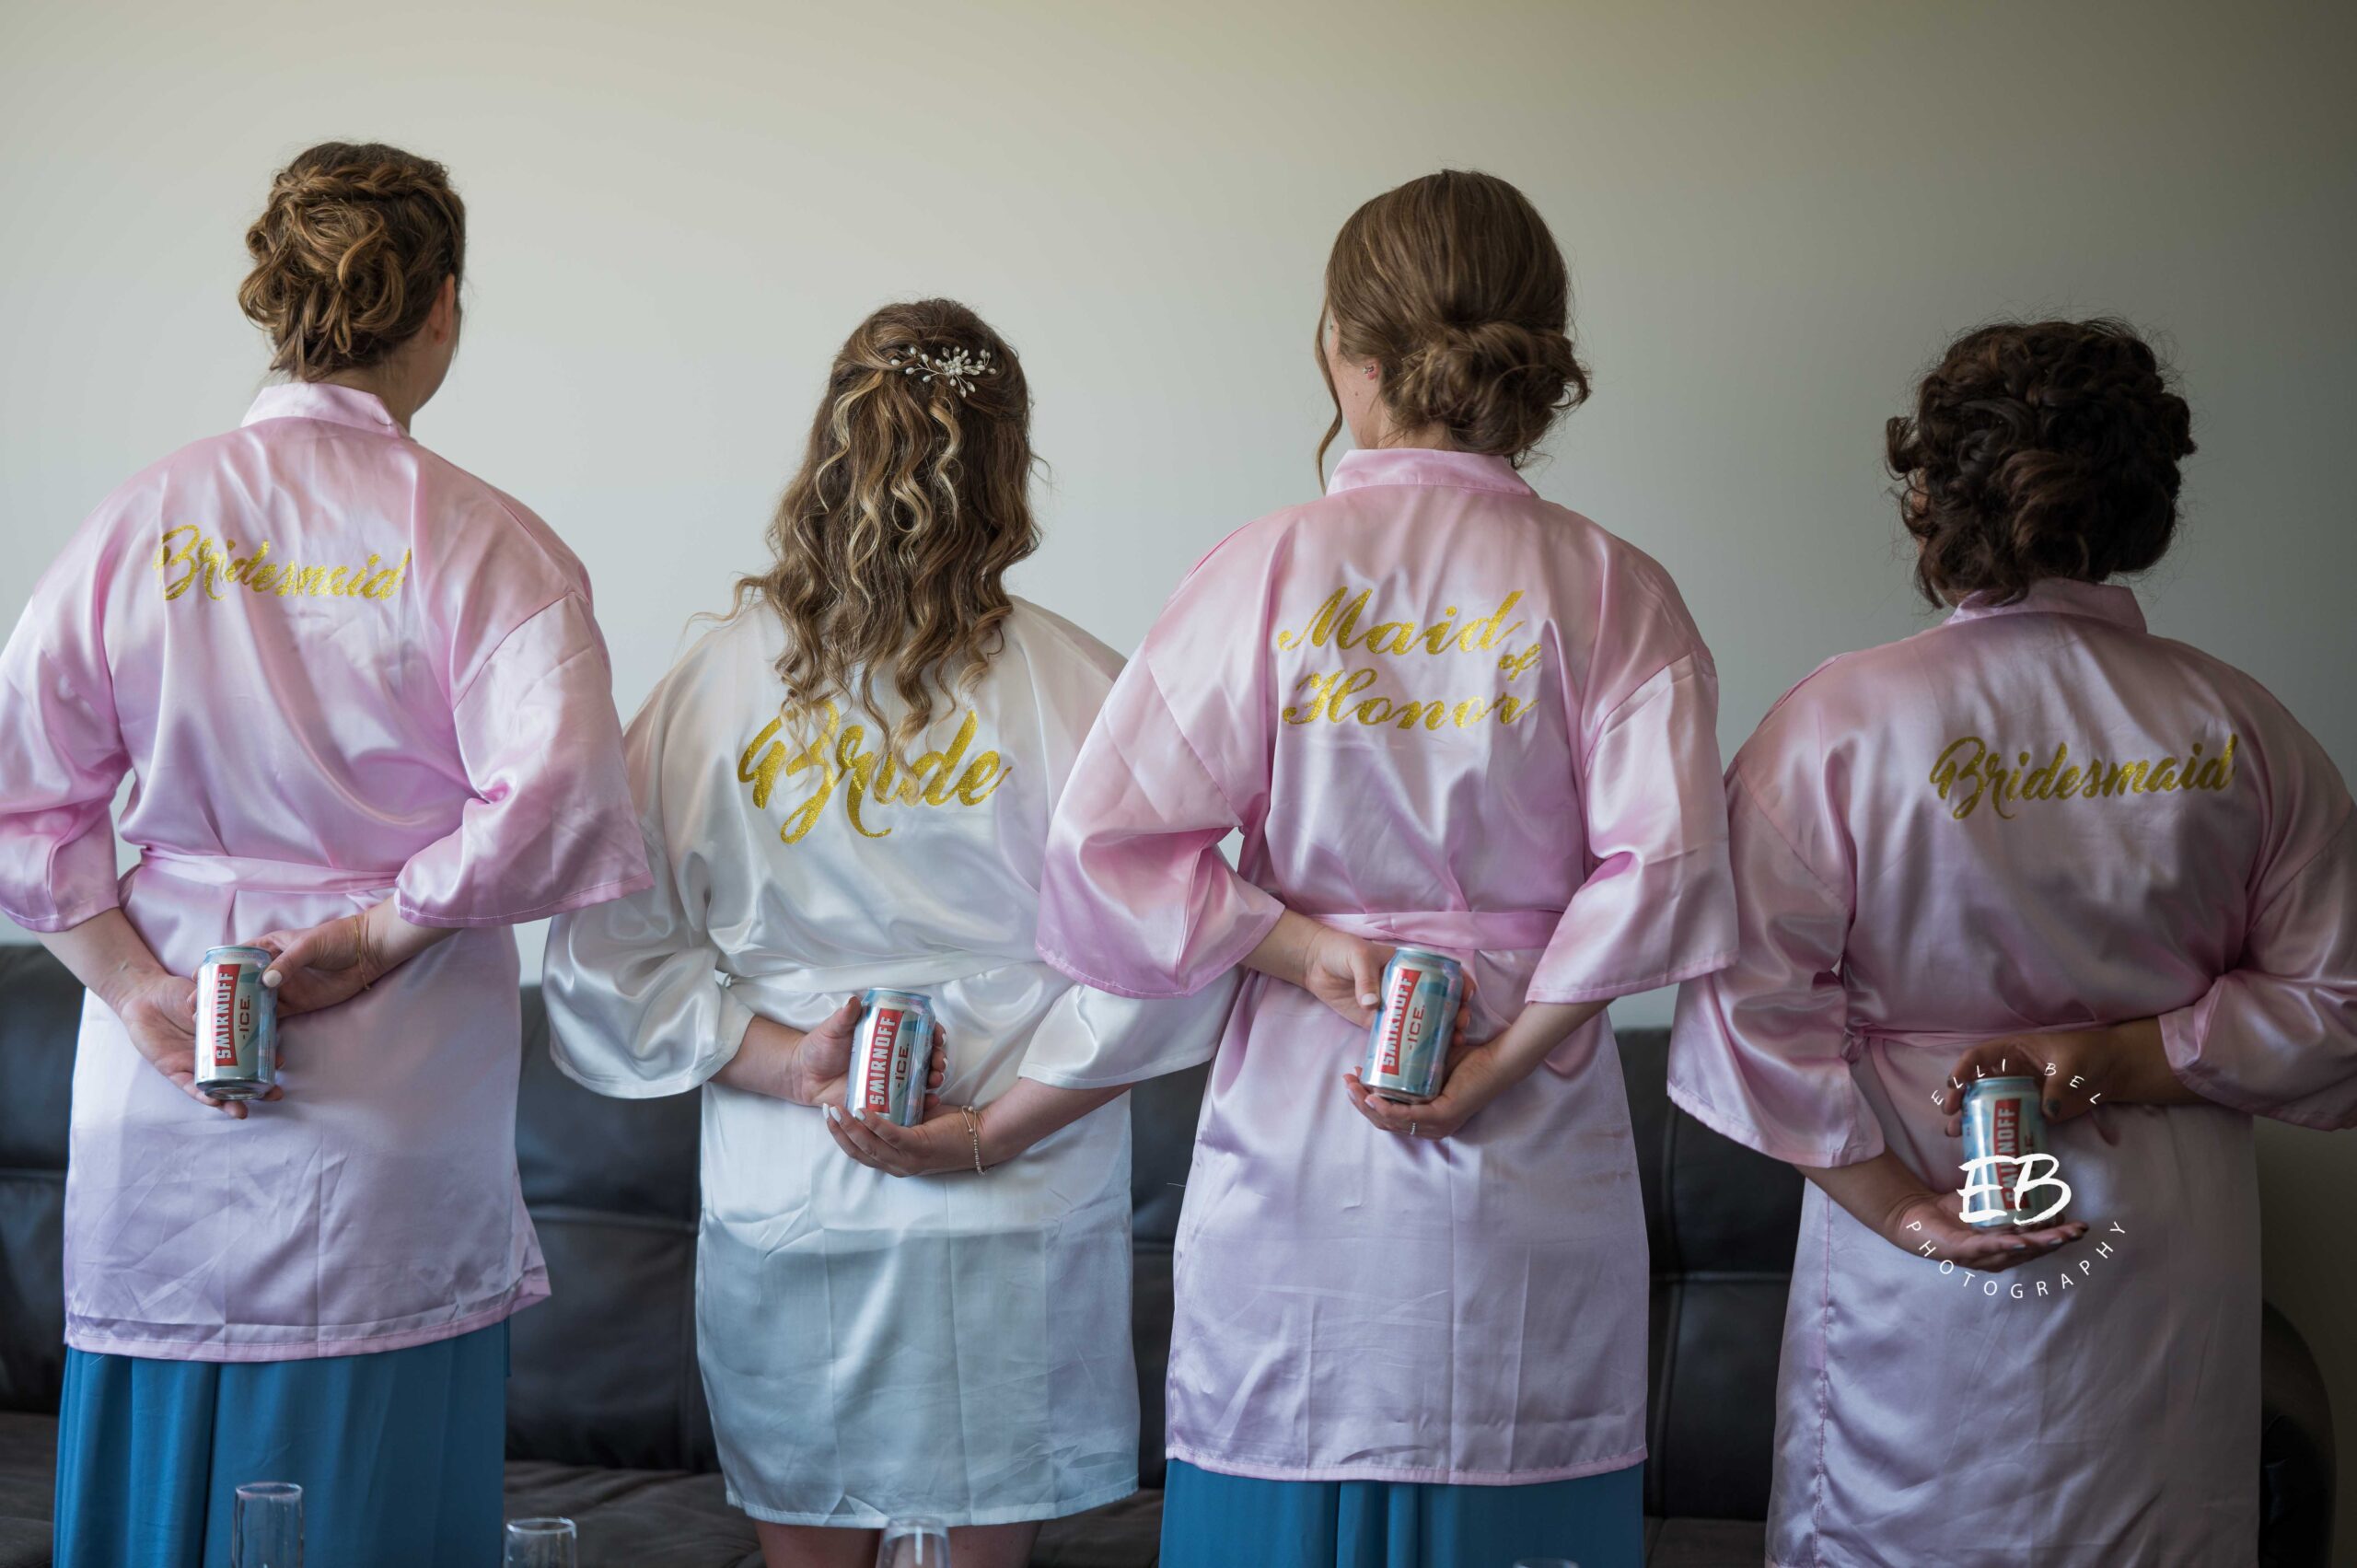 bridesmaids and bride holding beer cans behind their backs, facing away from camera